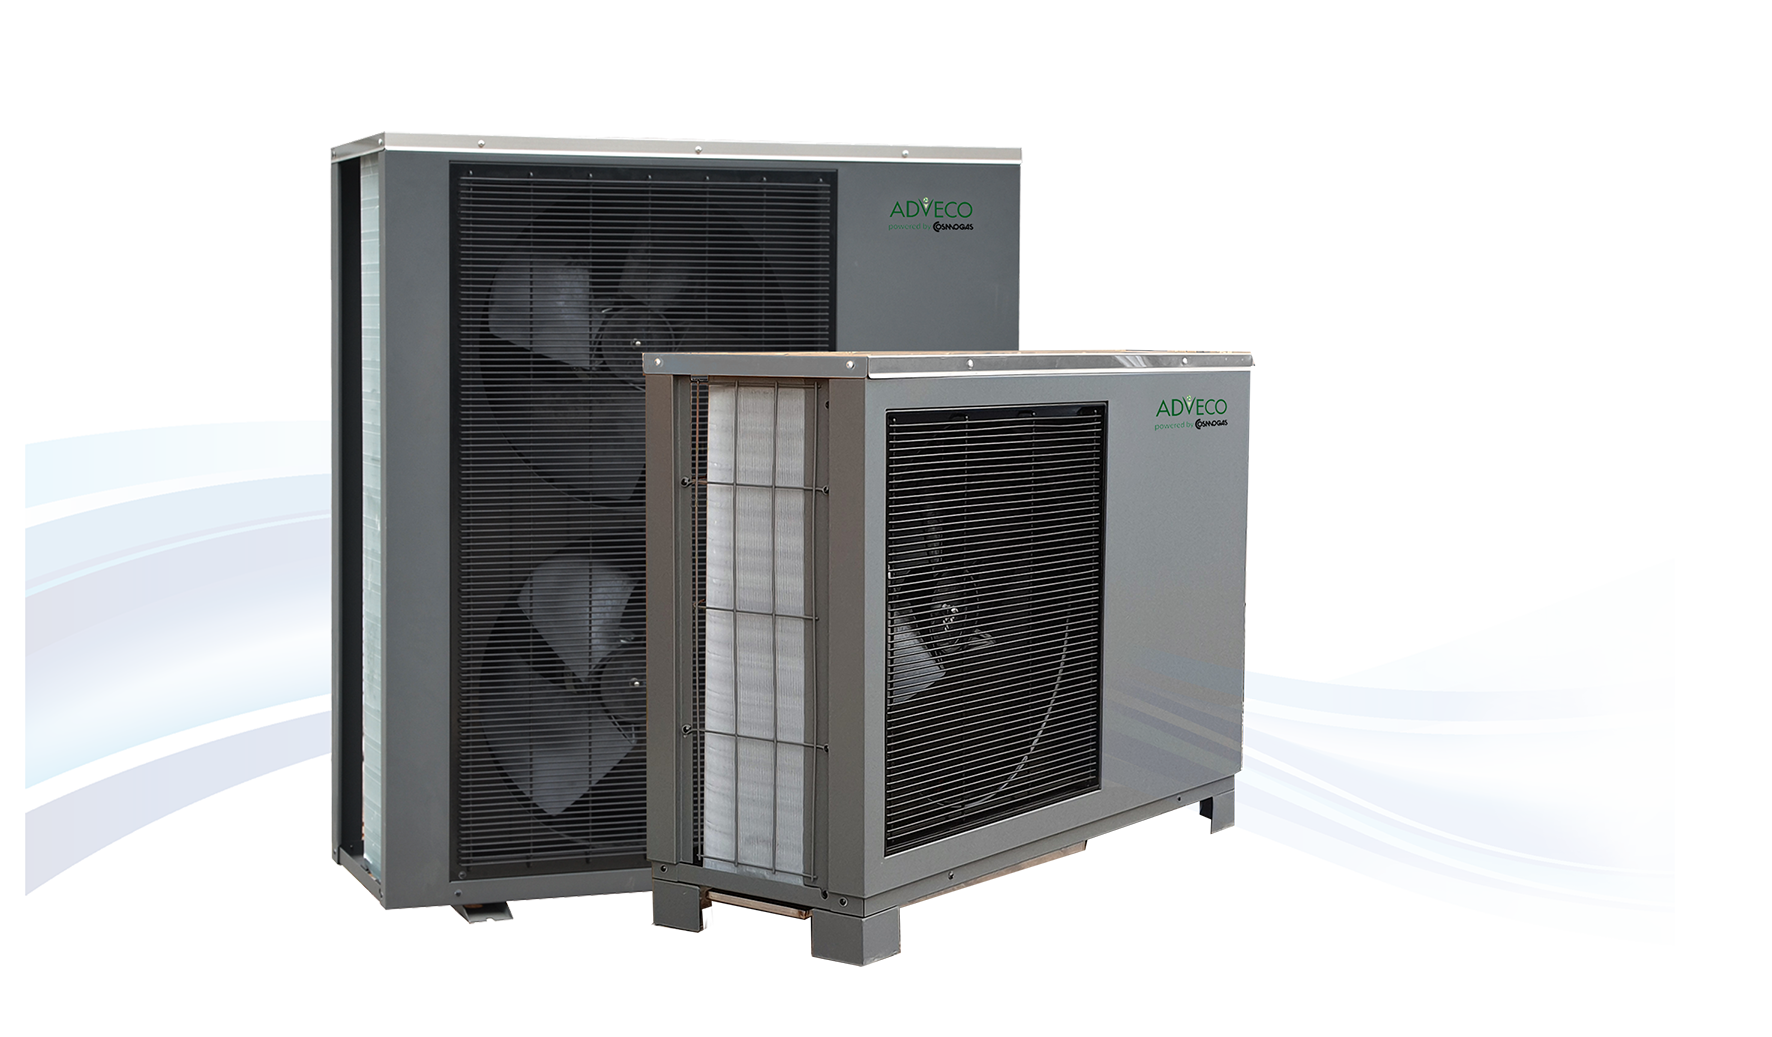 Adveco Introduces the FPi Range of Commercial Air Source Heat Pumps for Hybrid DHW Systems